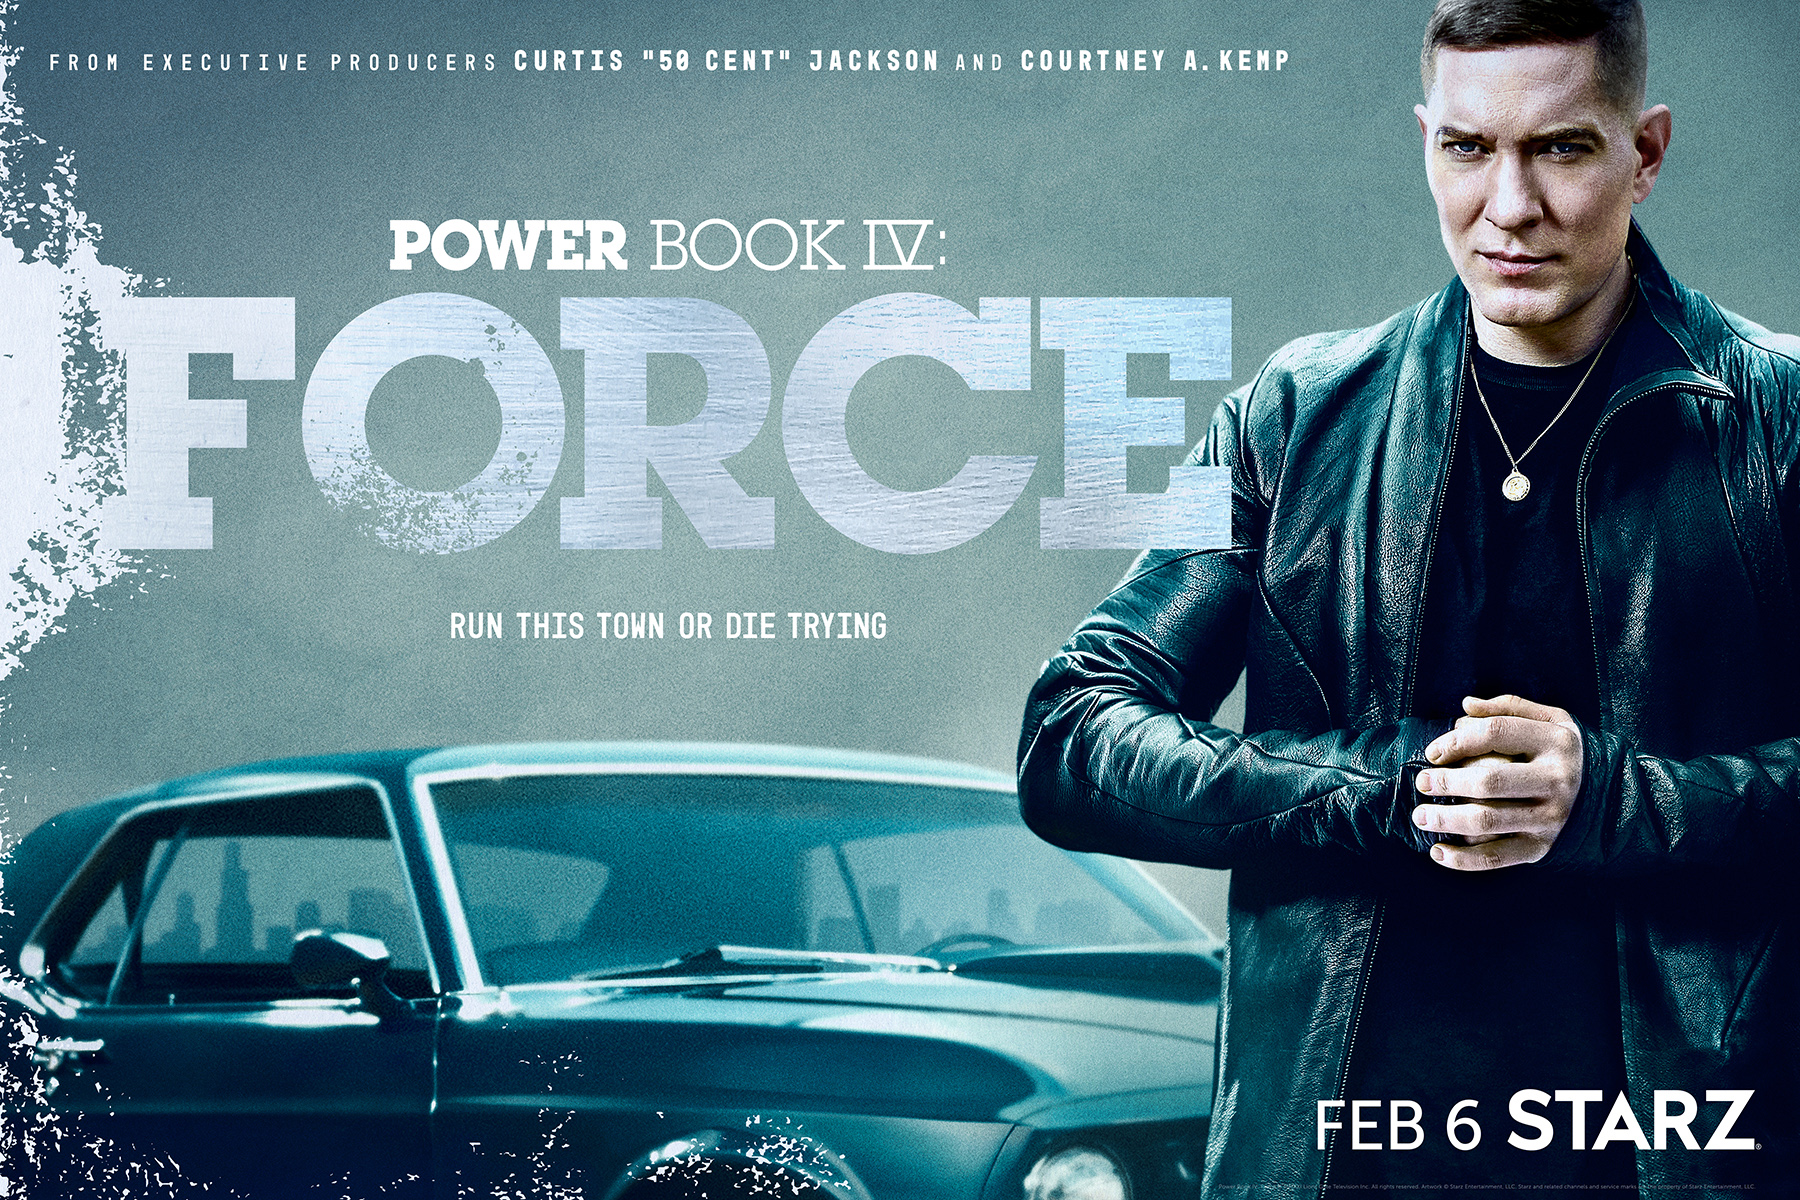 Power Book IV: Force (@forcestarz) • Instagram photos and videos